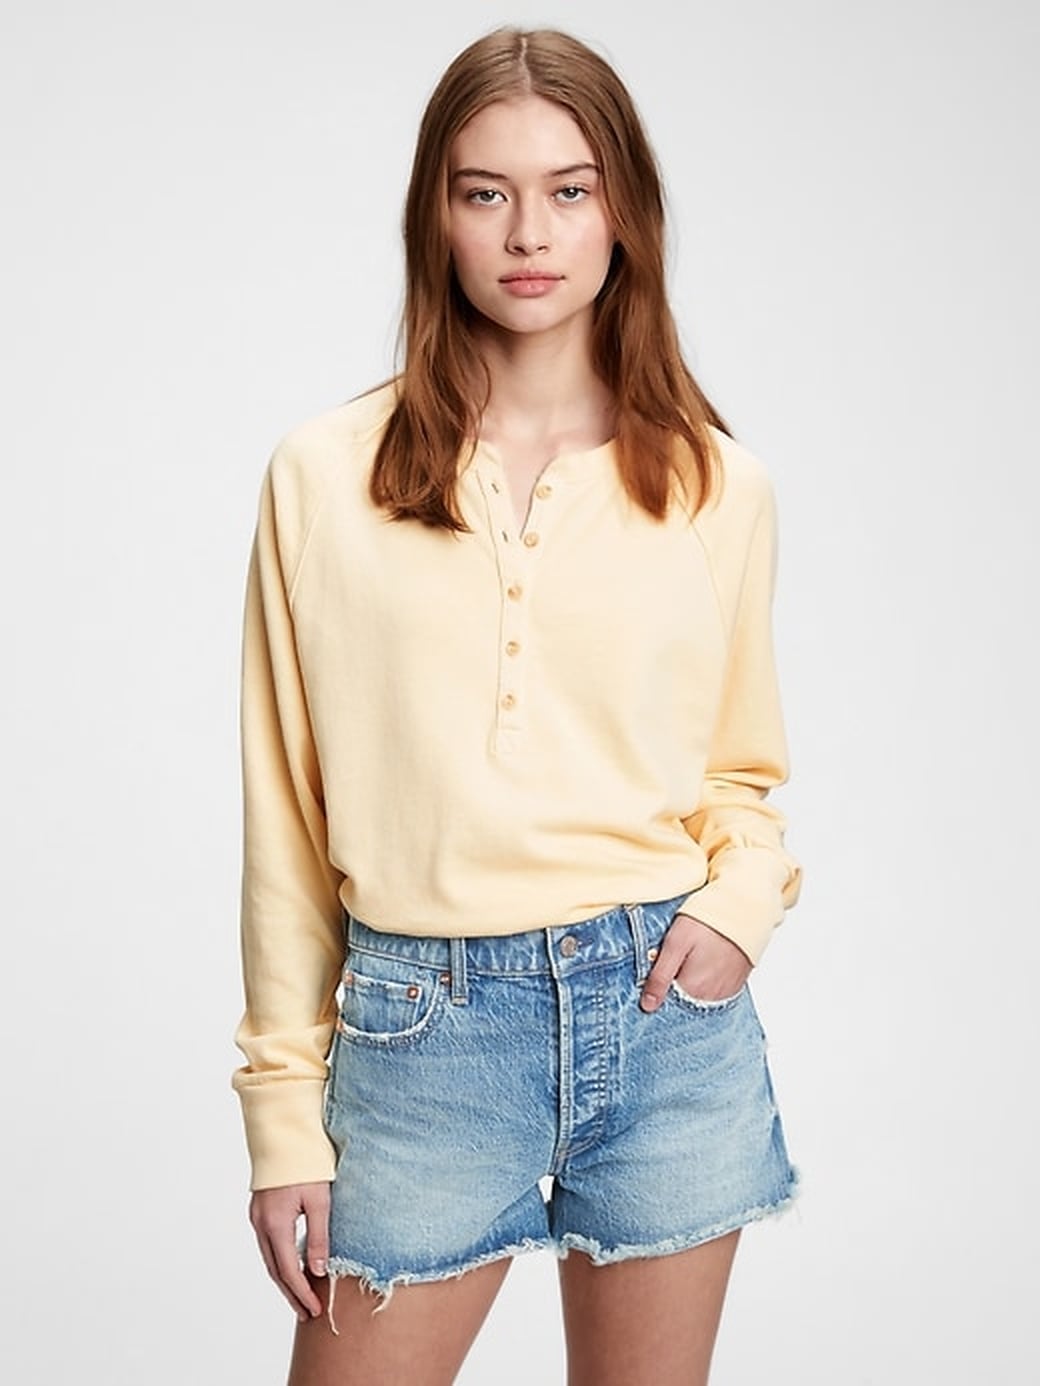 Best Spring Tops and Blouses From Gap 2021 | POPSUGAR Fashion